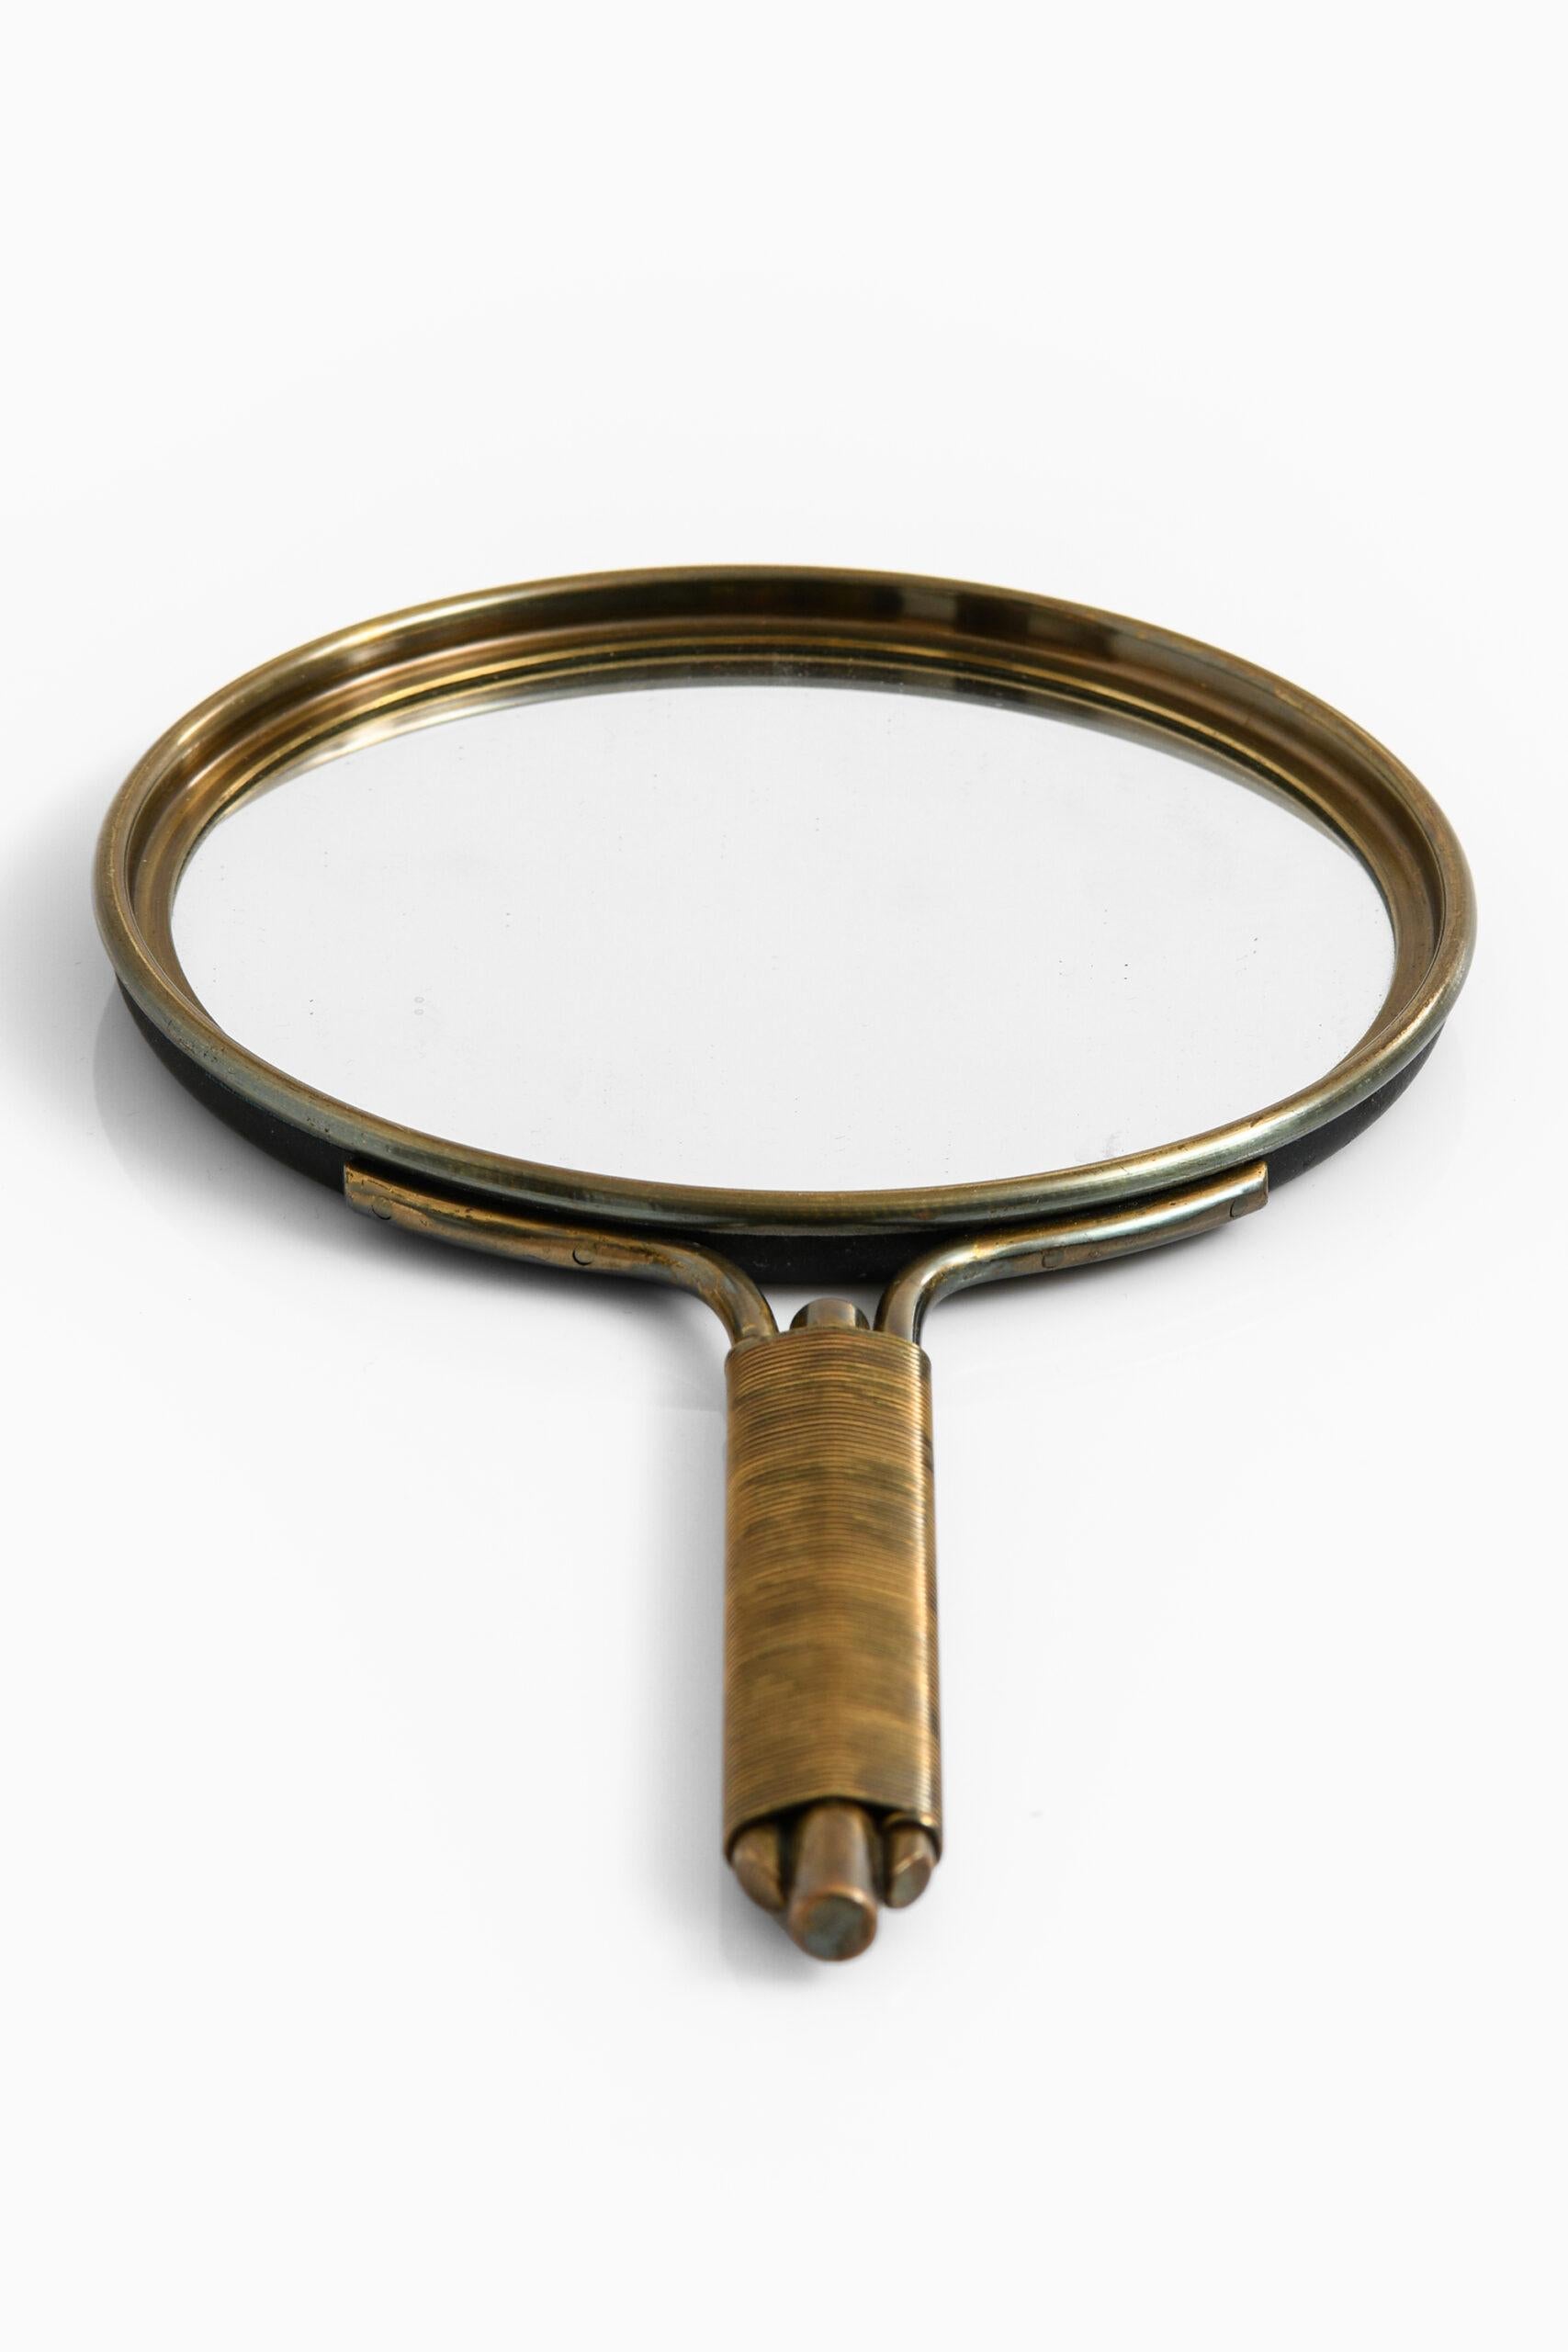 Rare hand mirror attributed to Hans-Agne Jakobsson. Probably produced by Hans-Agne Jakobsson AB in Markaryd, Sweden.